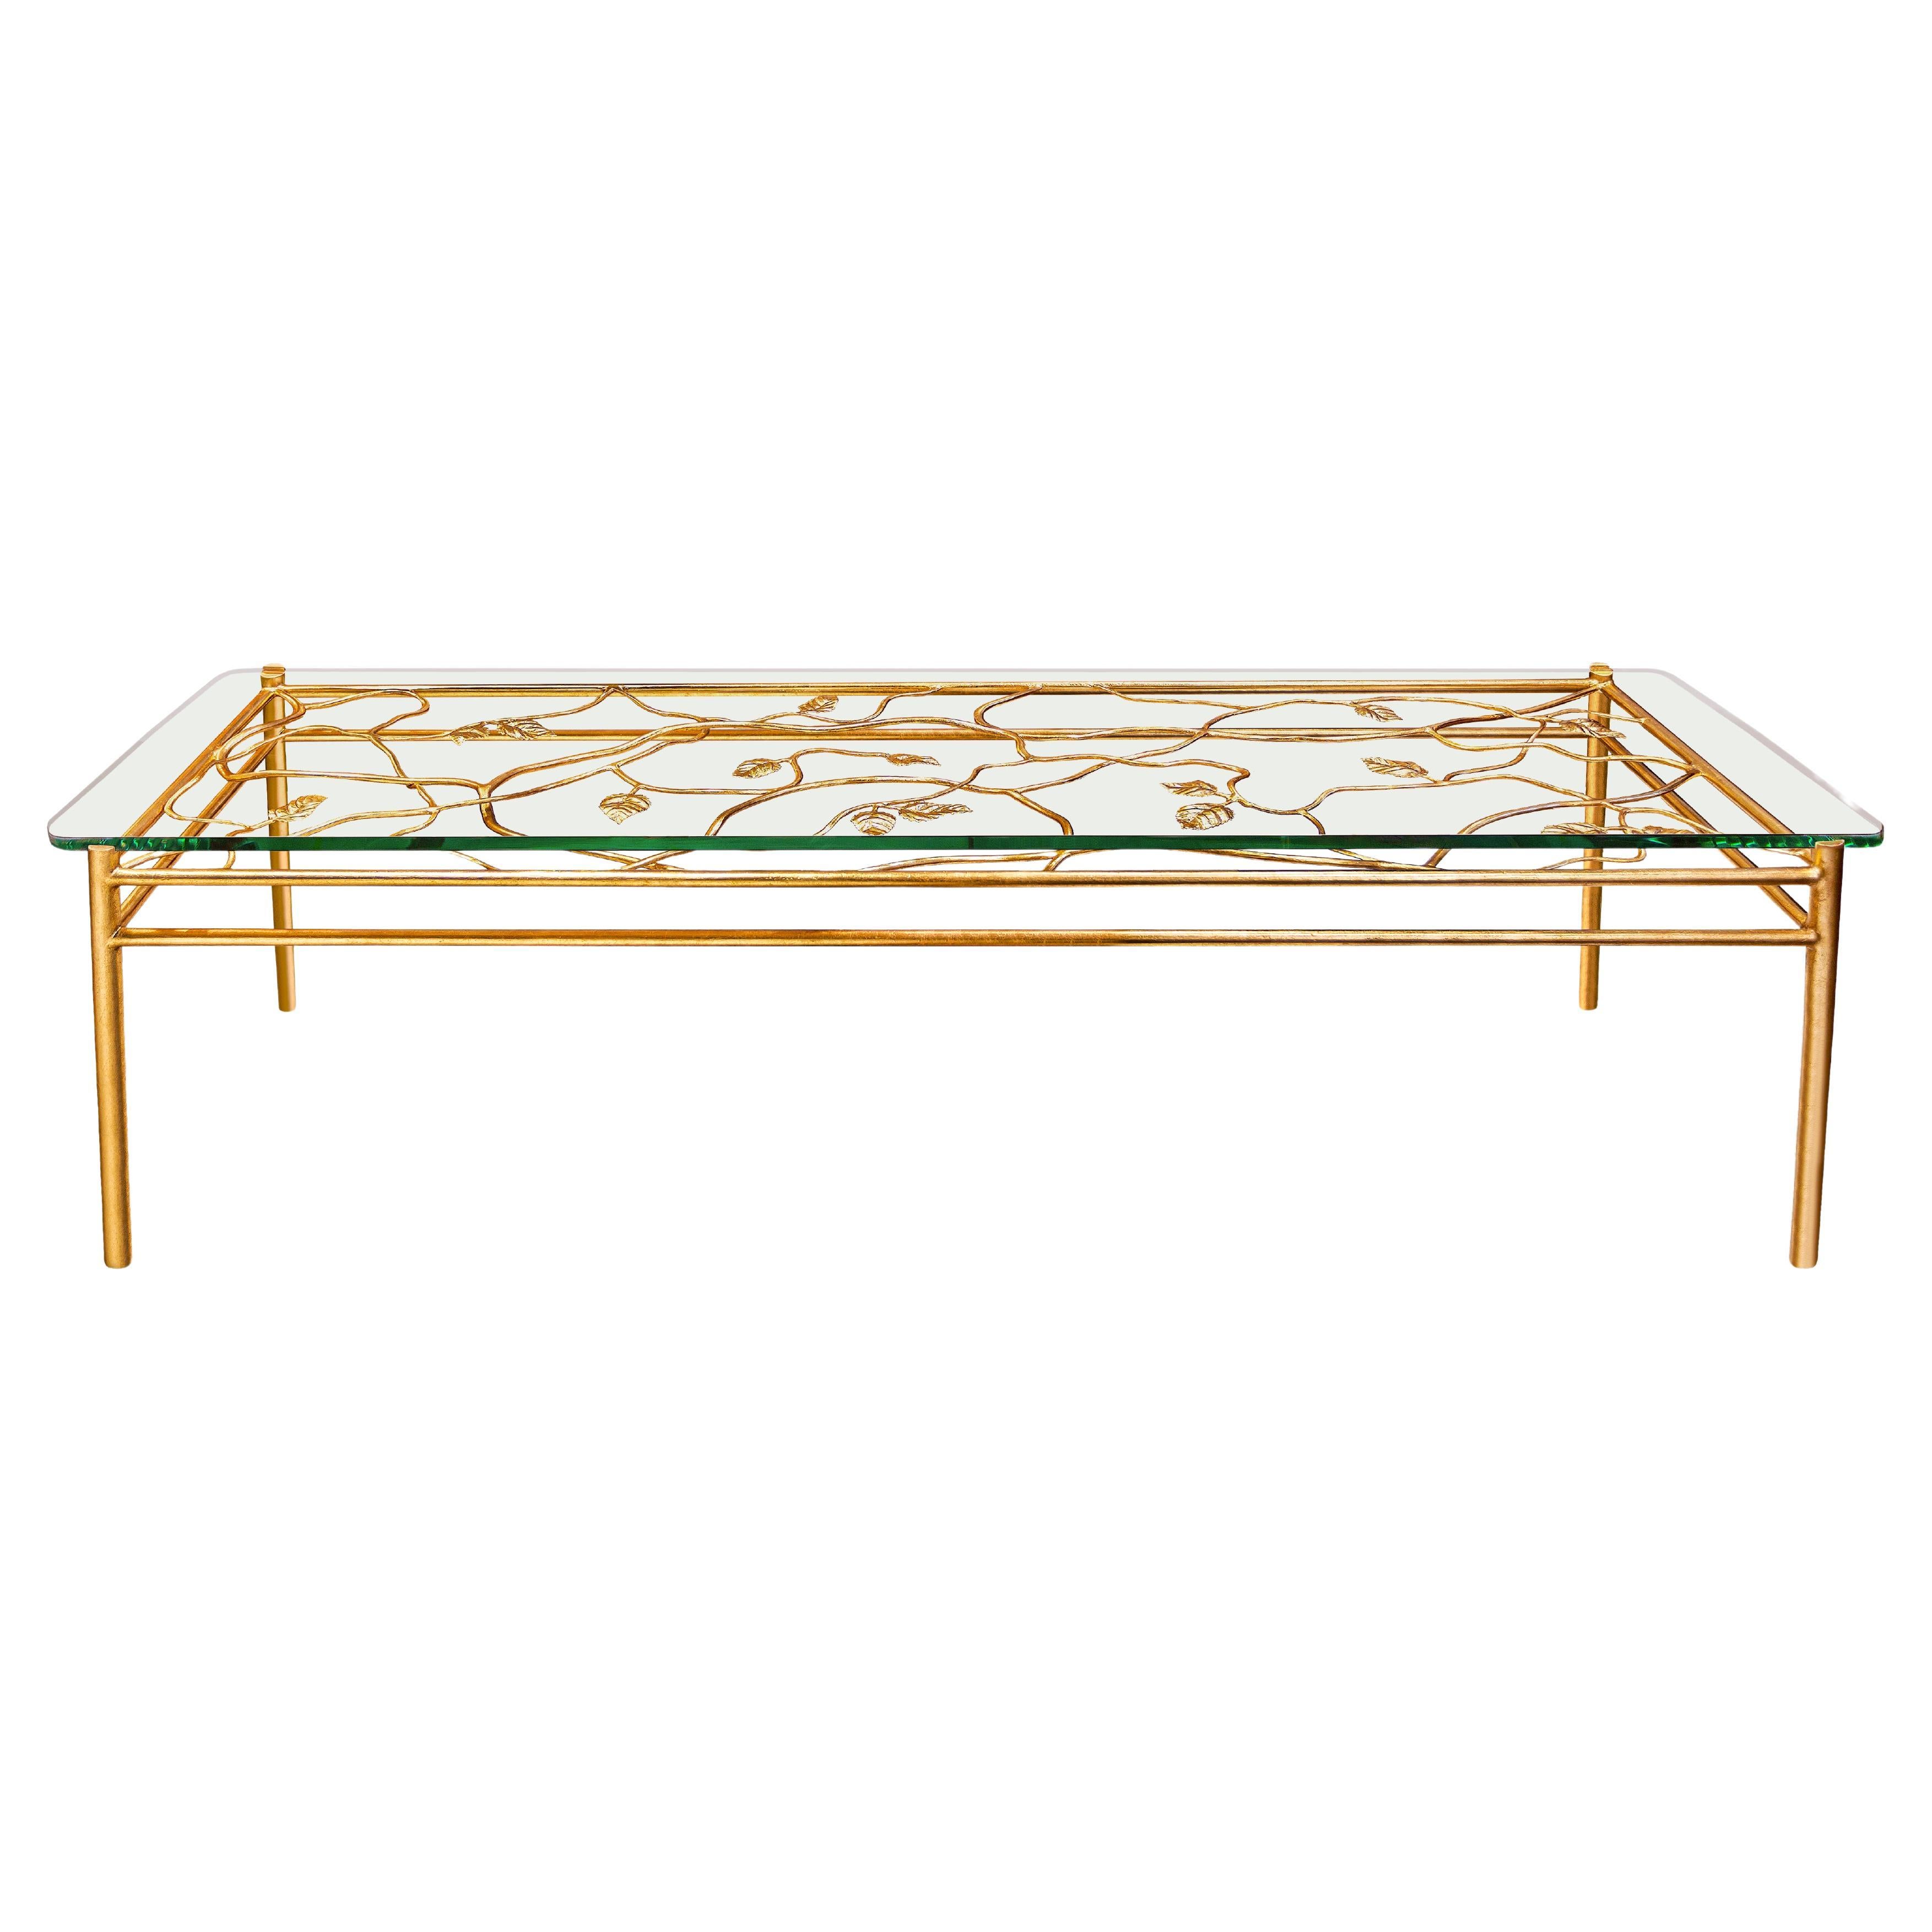 "Appian" Limited Edition Coffee Table, Antique Gold with Glass Top, Benediko For Sale